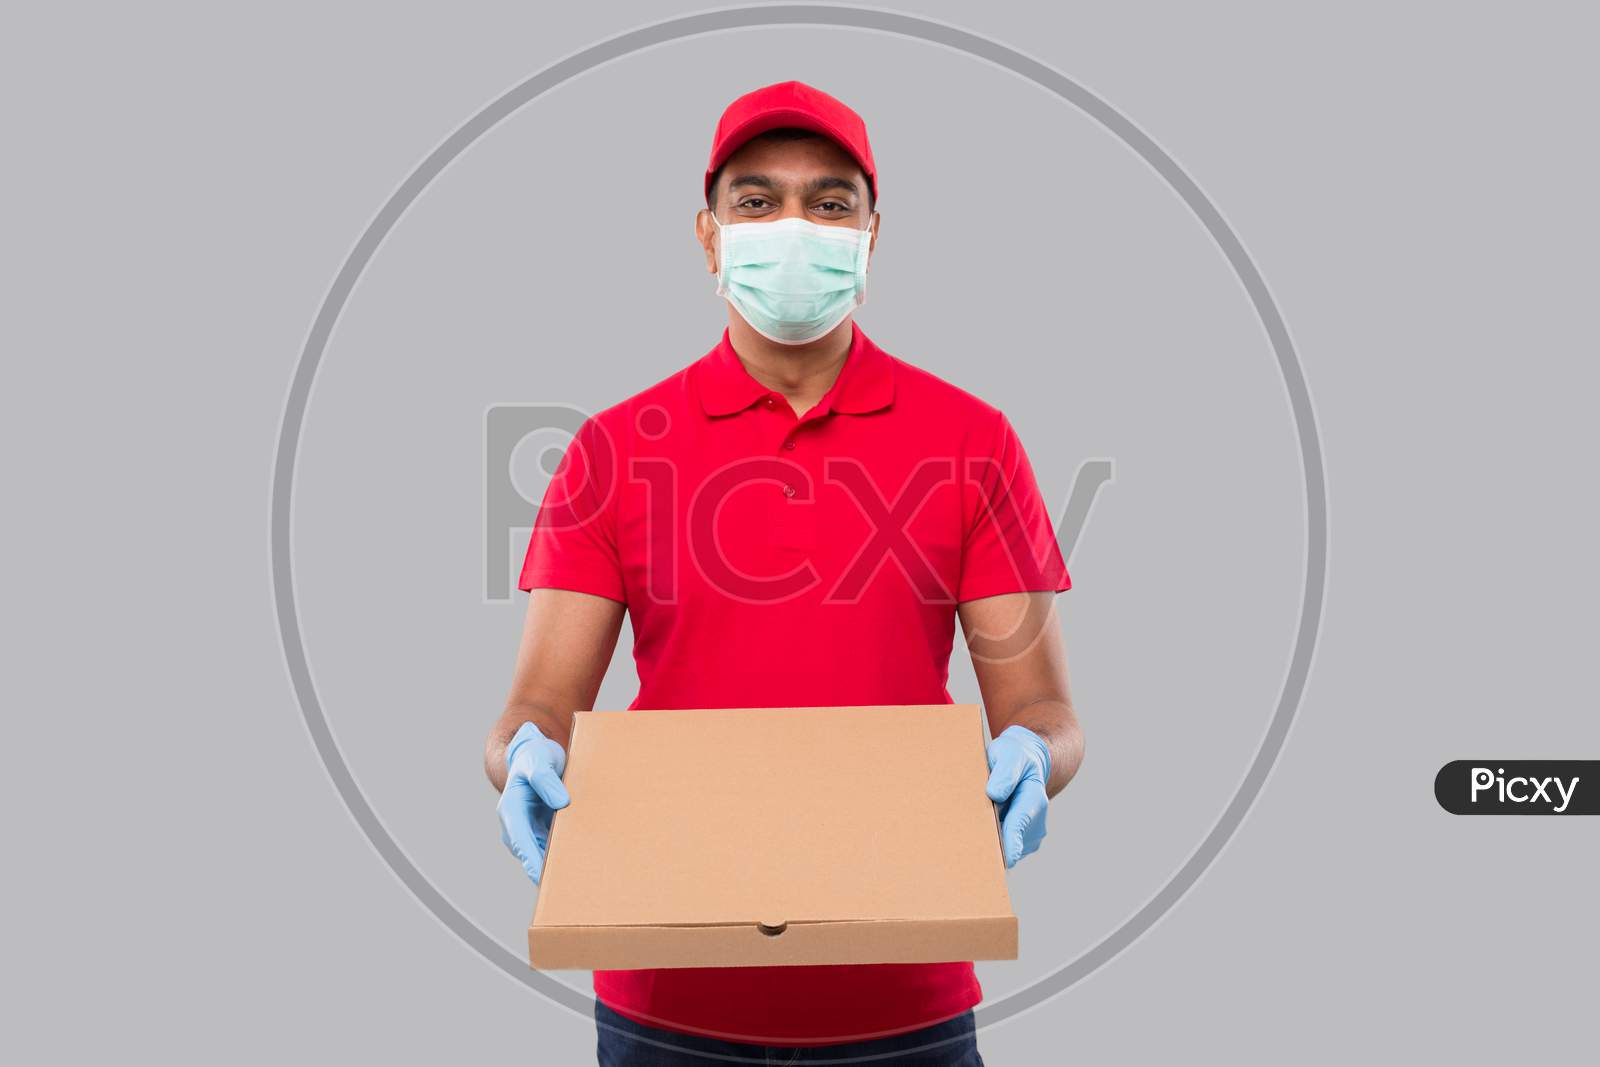 Delivery Man Pizza Box In Hands Wearing Medical Mask And Gloves Isolated. Red Tshirt Indian Delivery Boy.